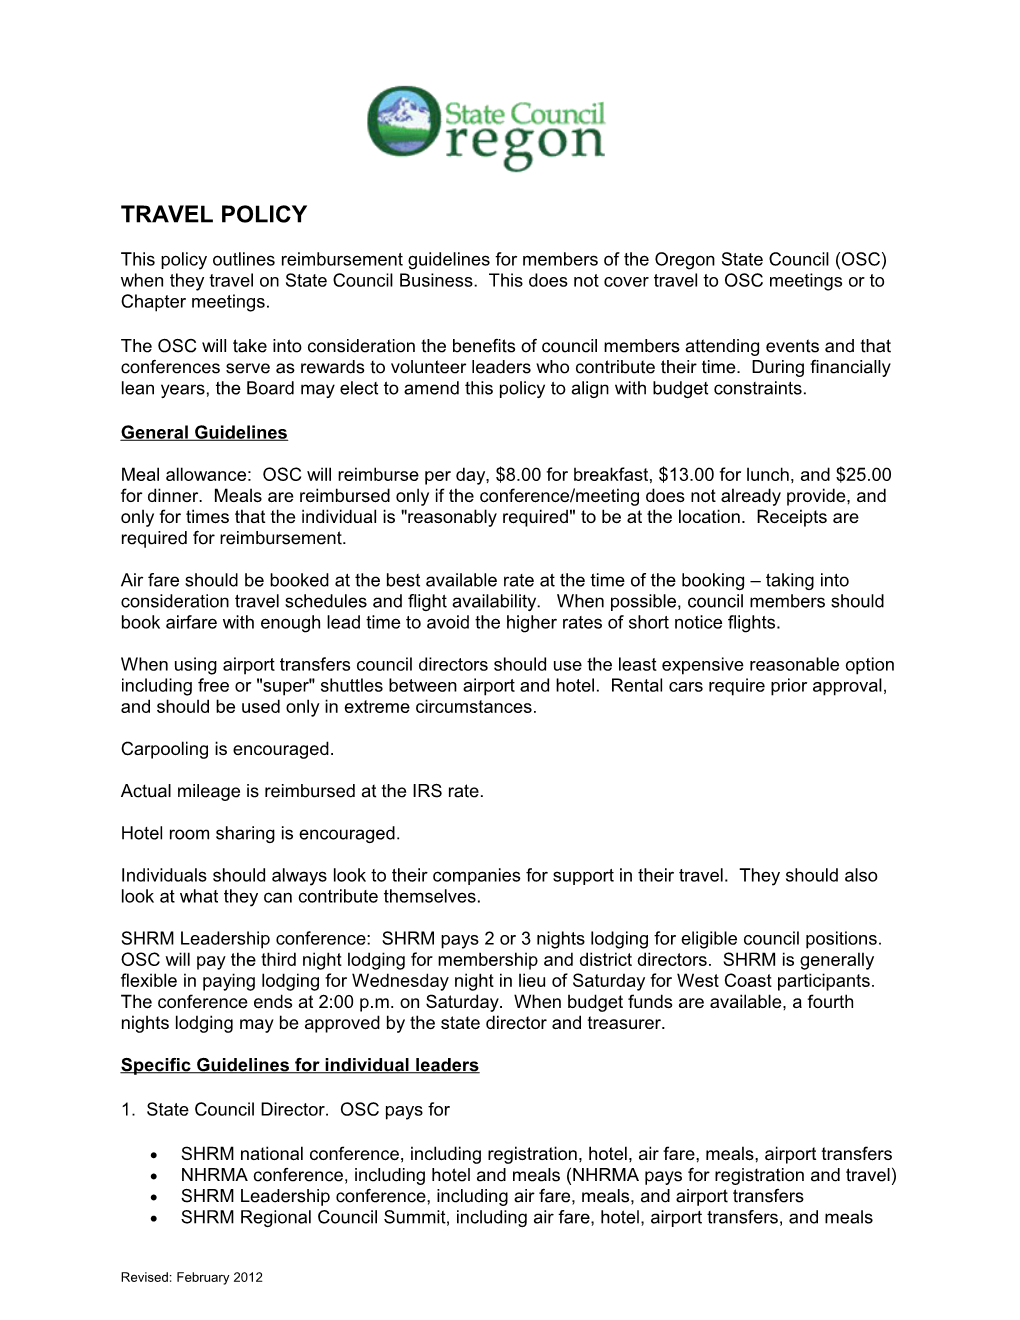 Travel Policy Page 2